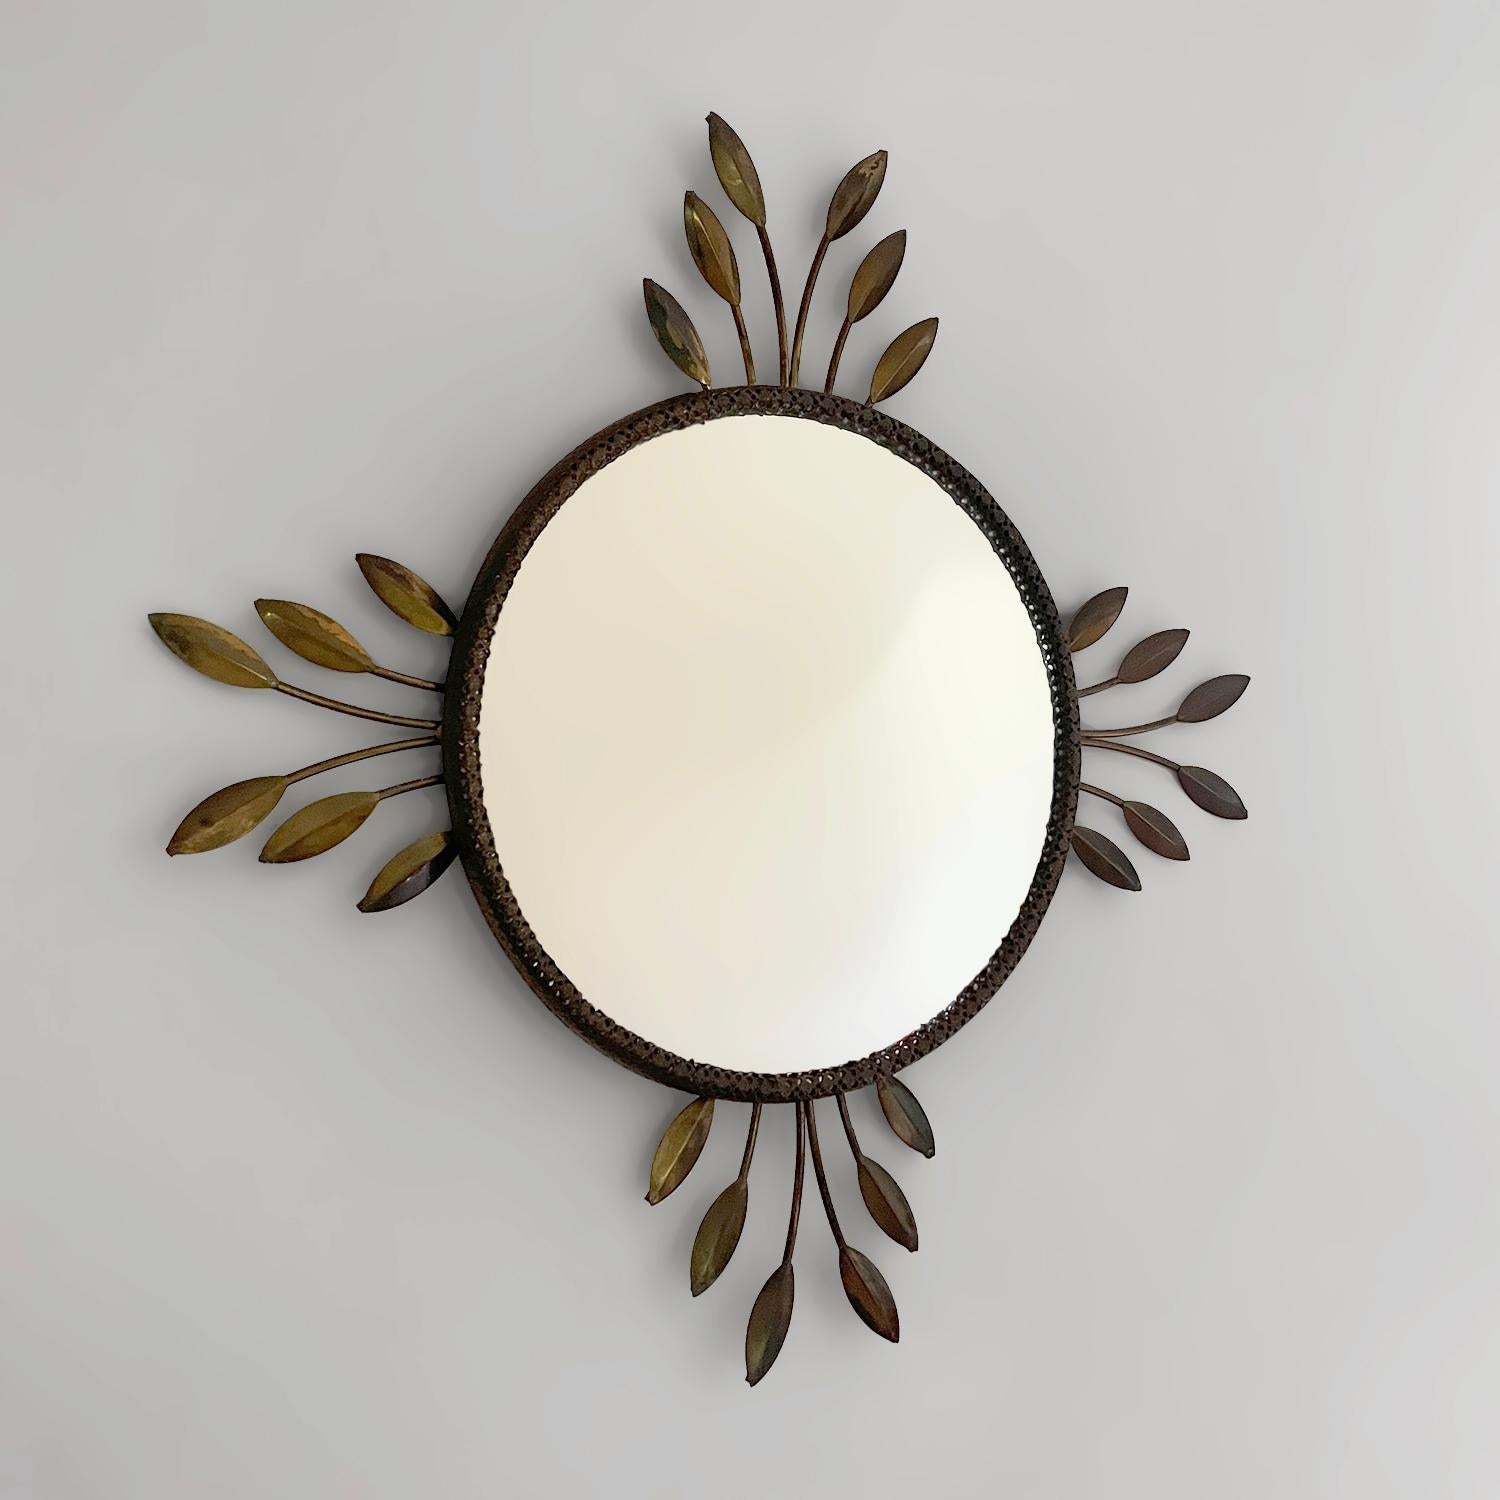 Italian floral sunburst convex mirror
Italy, circa 1950s 
This mirror will bring a smile to anyone who encounters it
Aged brass toned floral leaf detailing encompasses the embossed metal stamped frame
Each leaf unique in its composition
Natural